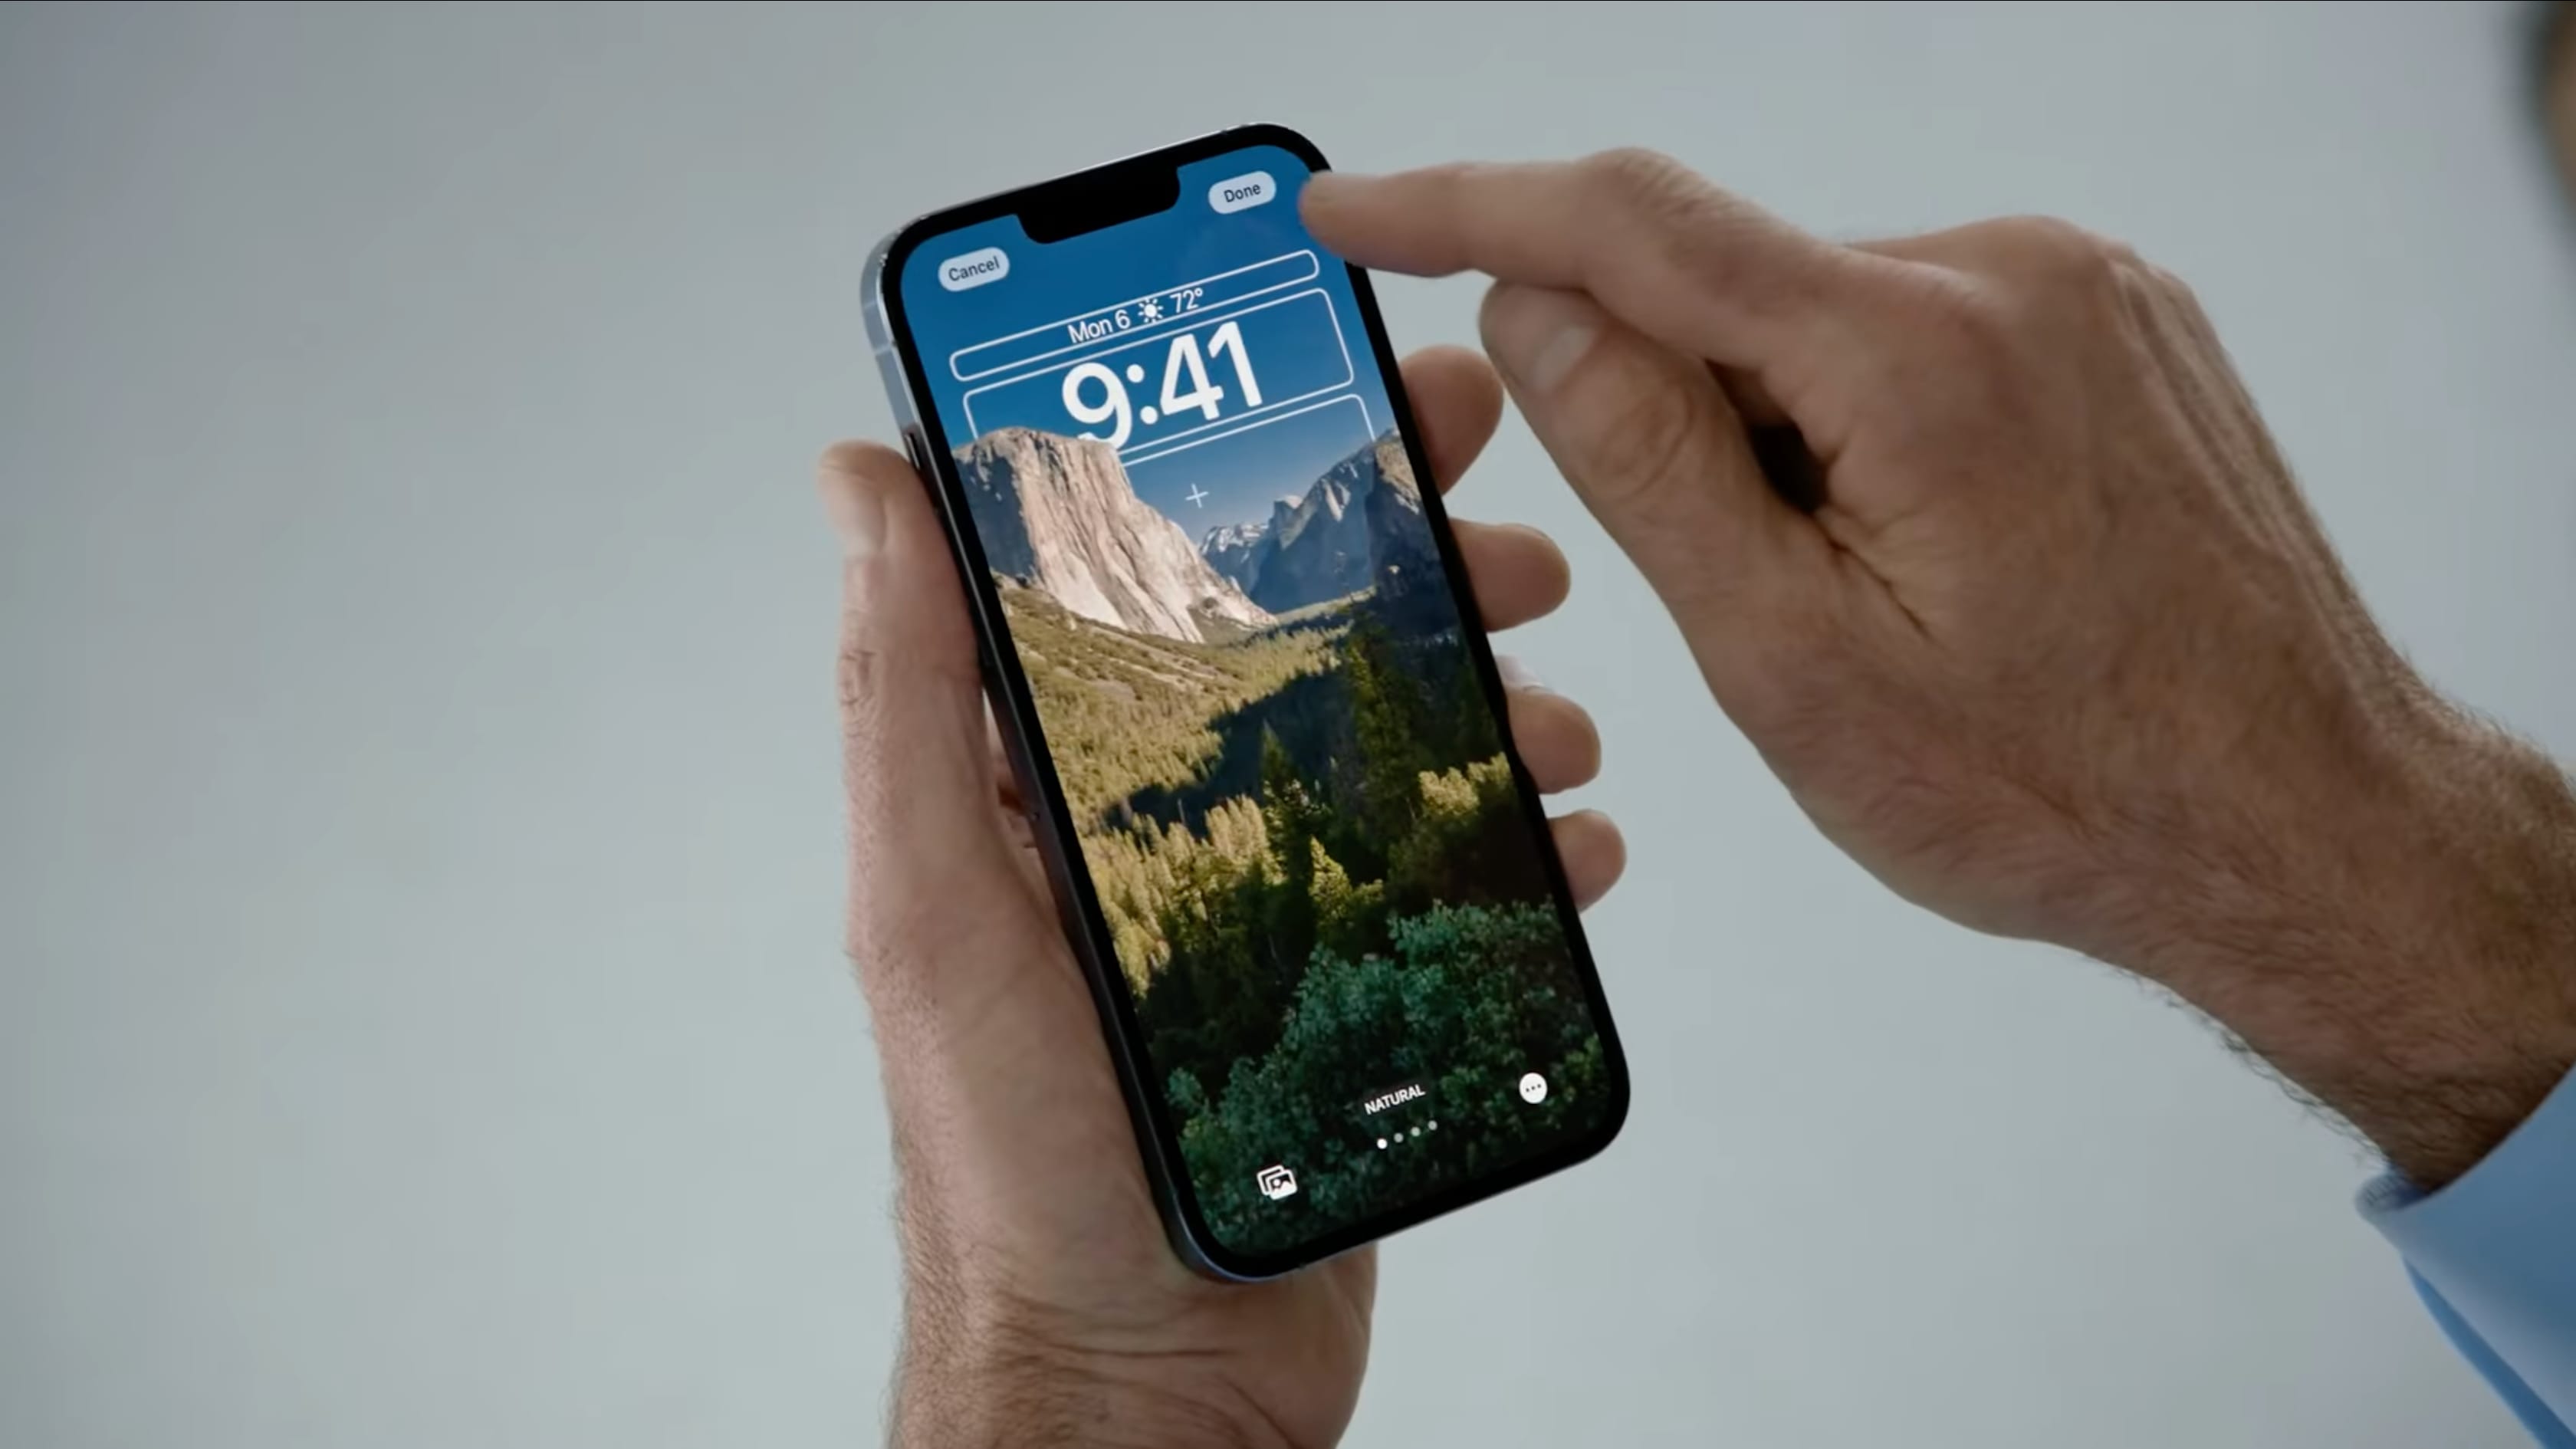 Customizing iOS 16's iPhone lock screen using the Natural theme is seen in this still image grabbed from Apple's WWDC 2022 keynote video